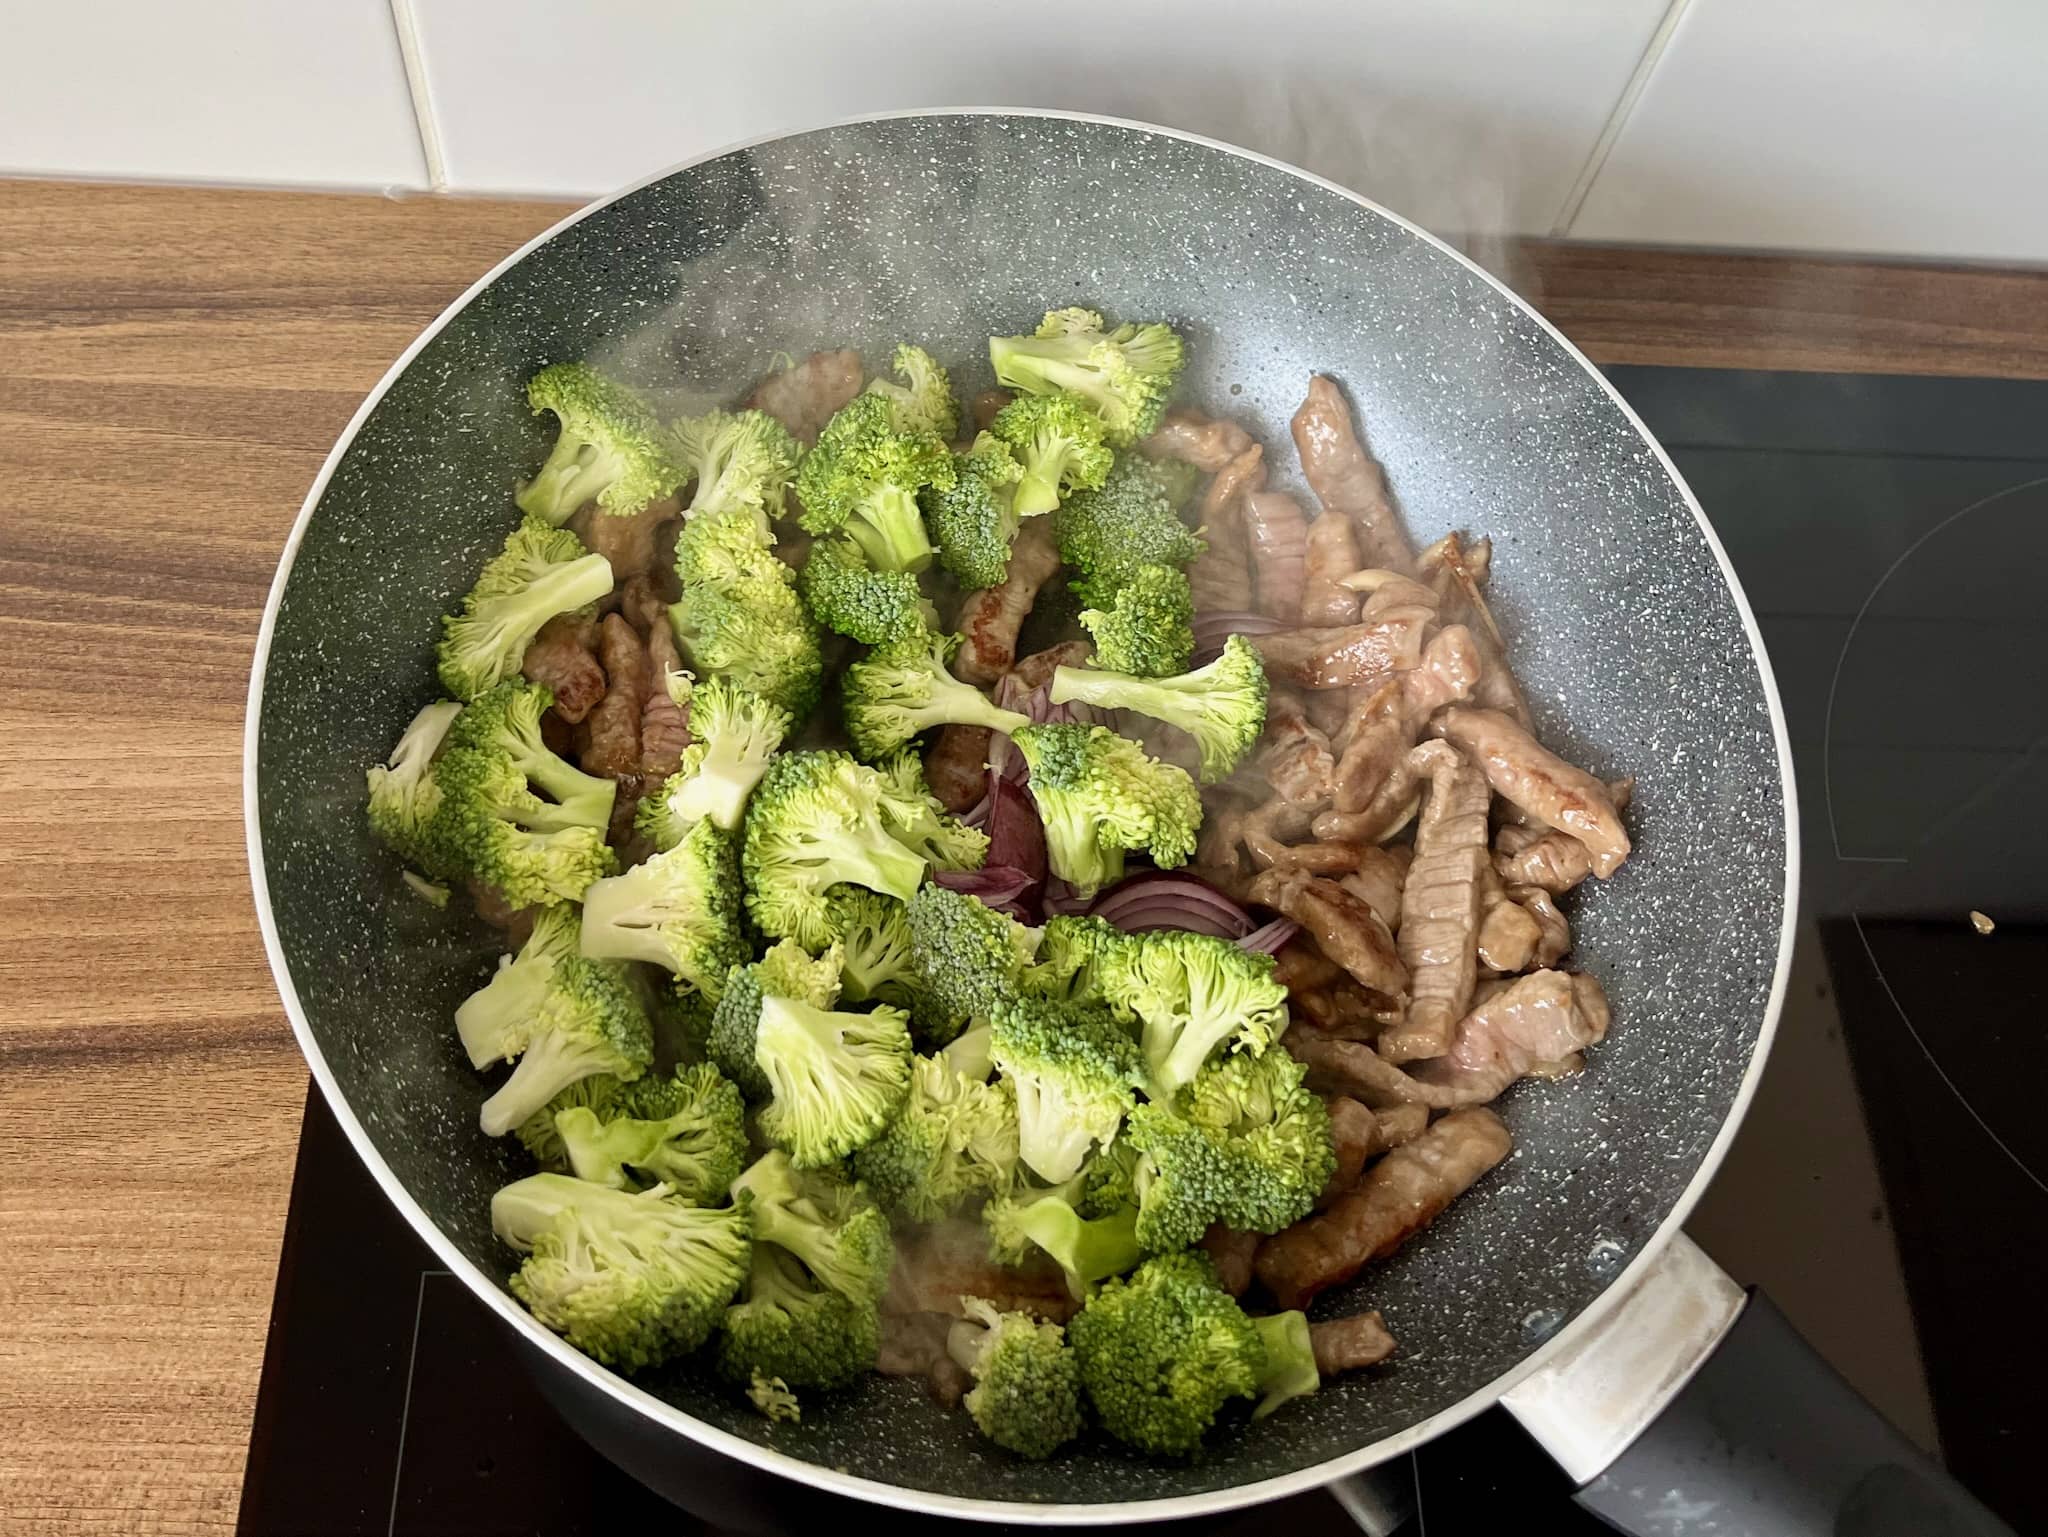 Fried beef in a pan with broccoli florets on top